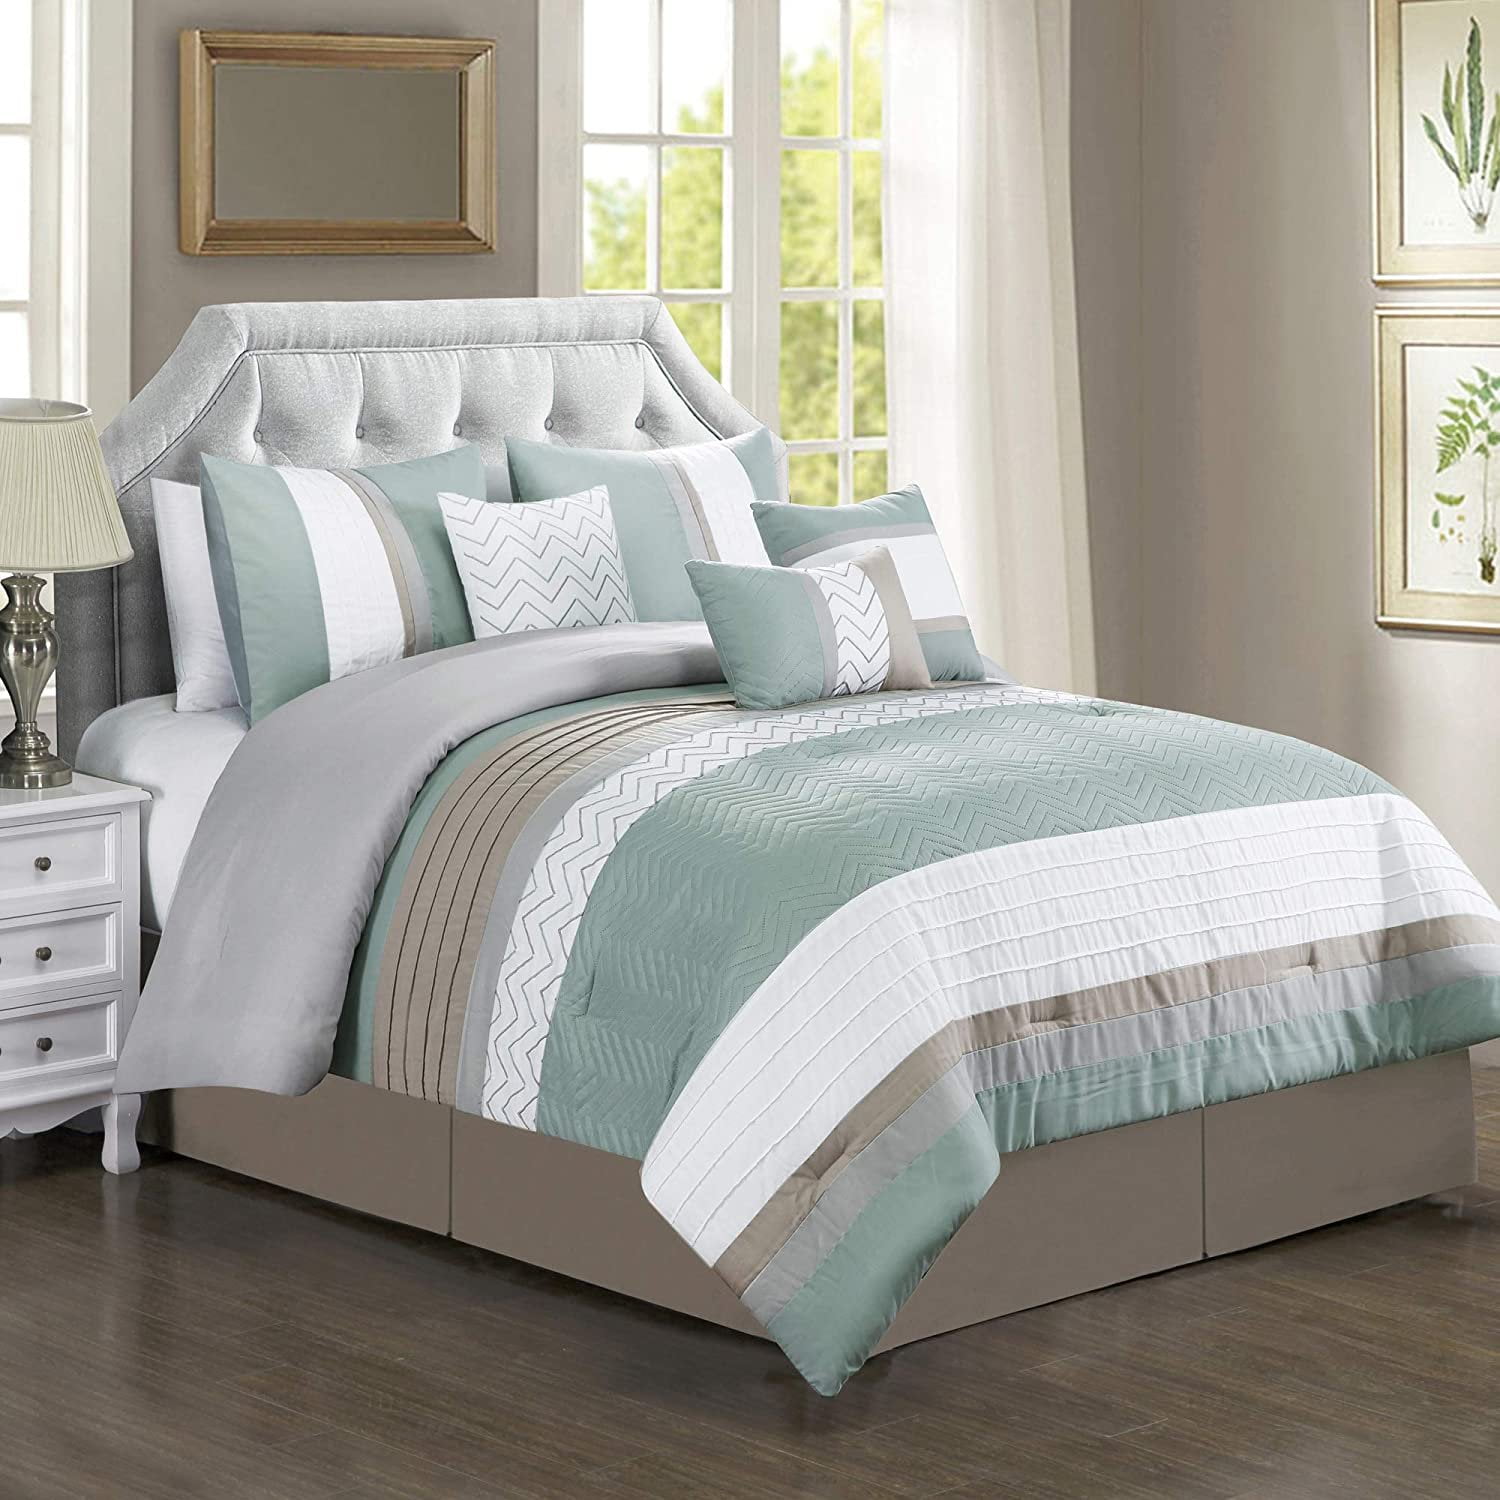 Mint Green White Brown Bed Cover, Green Cal King Bedding